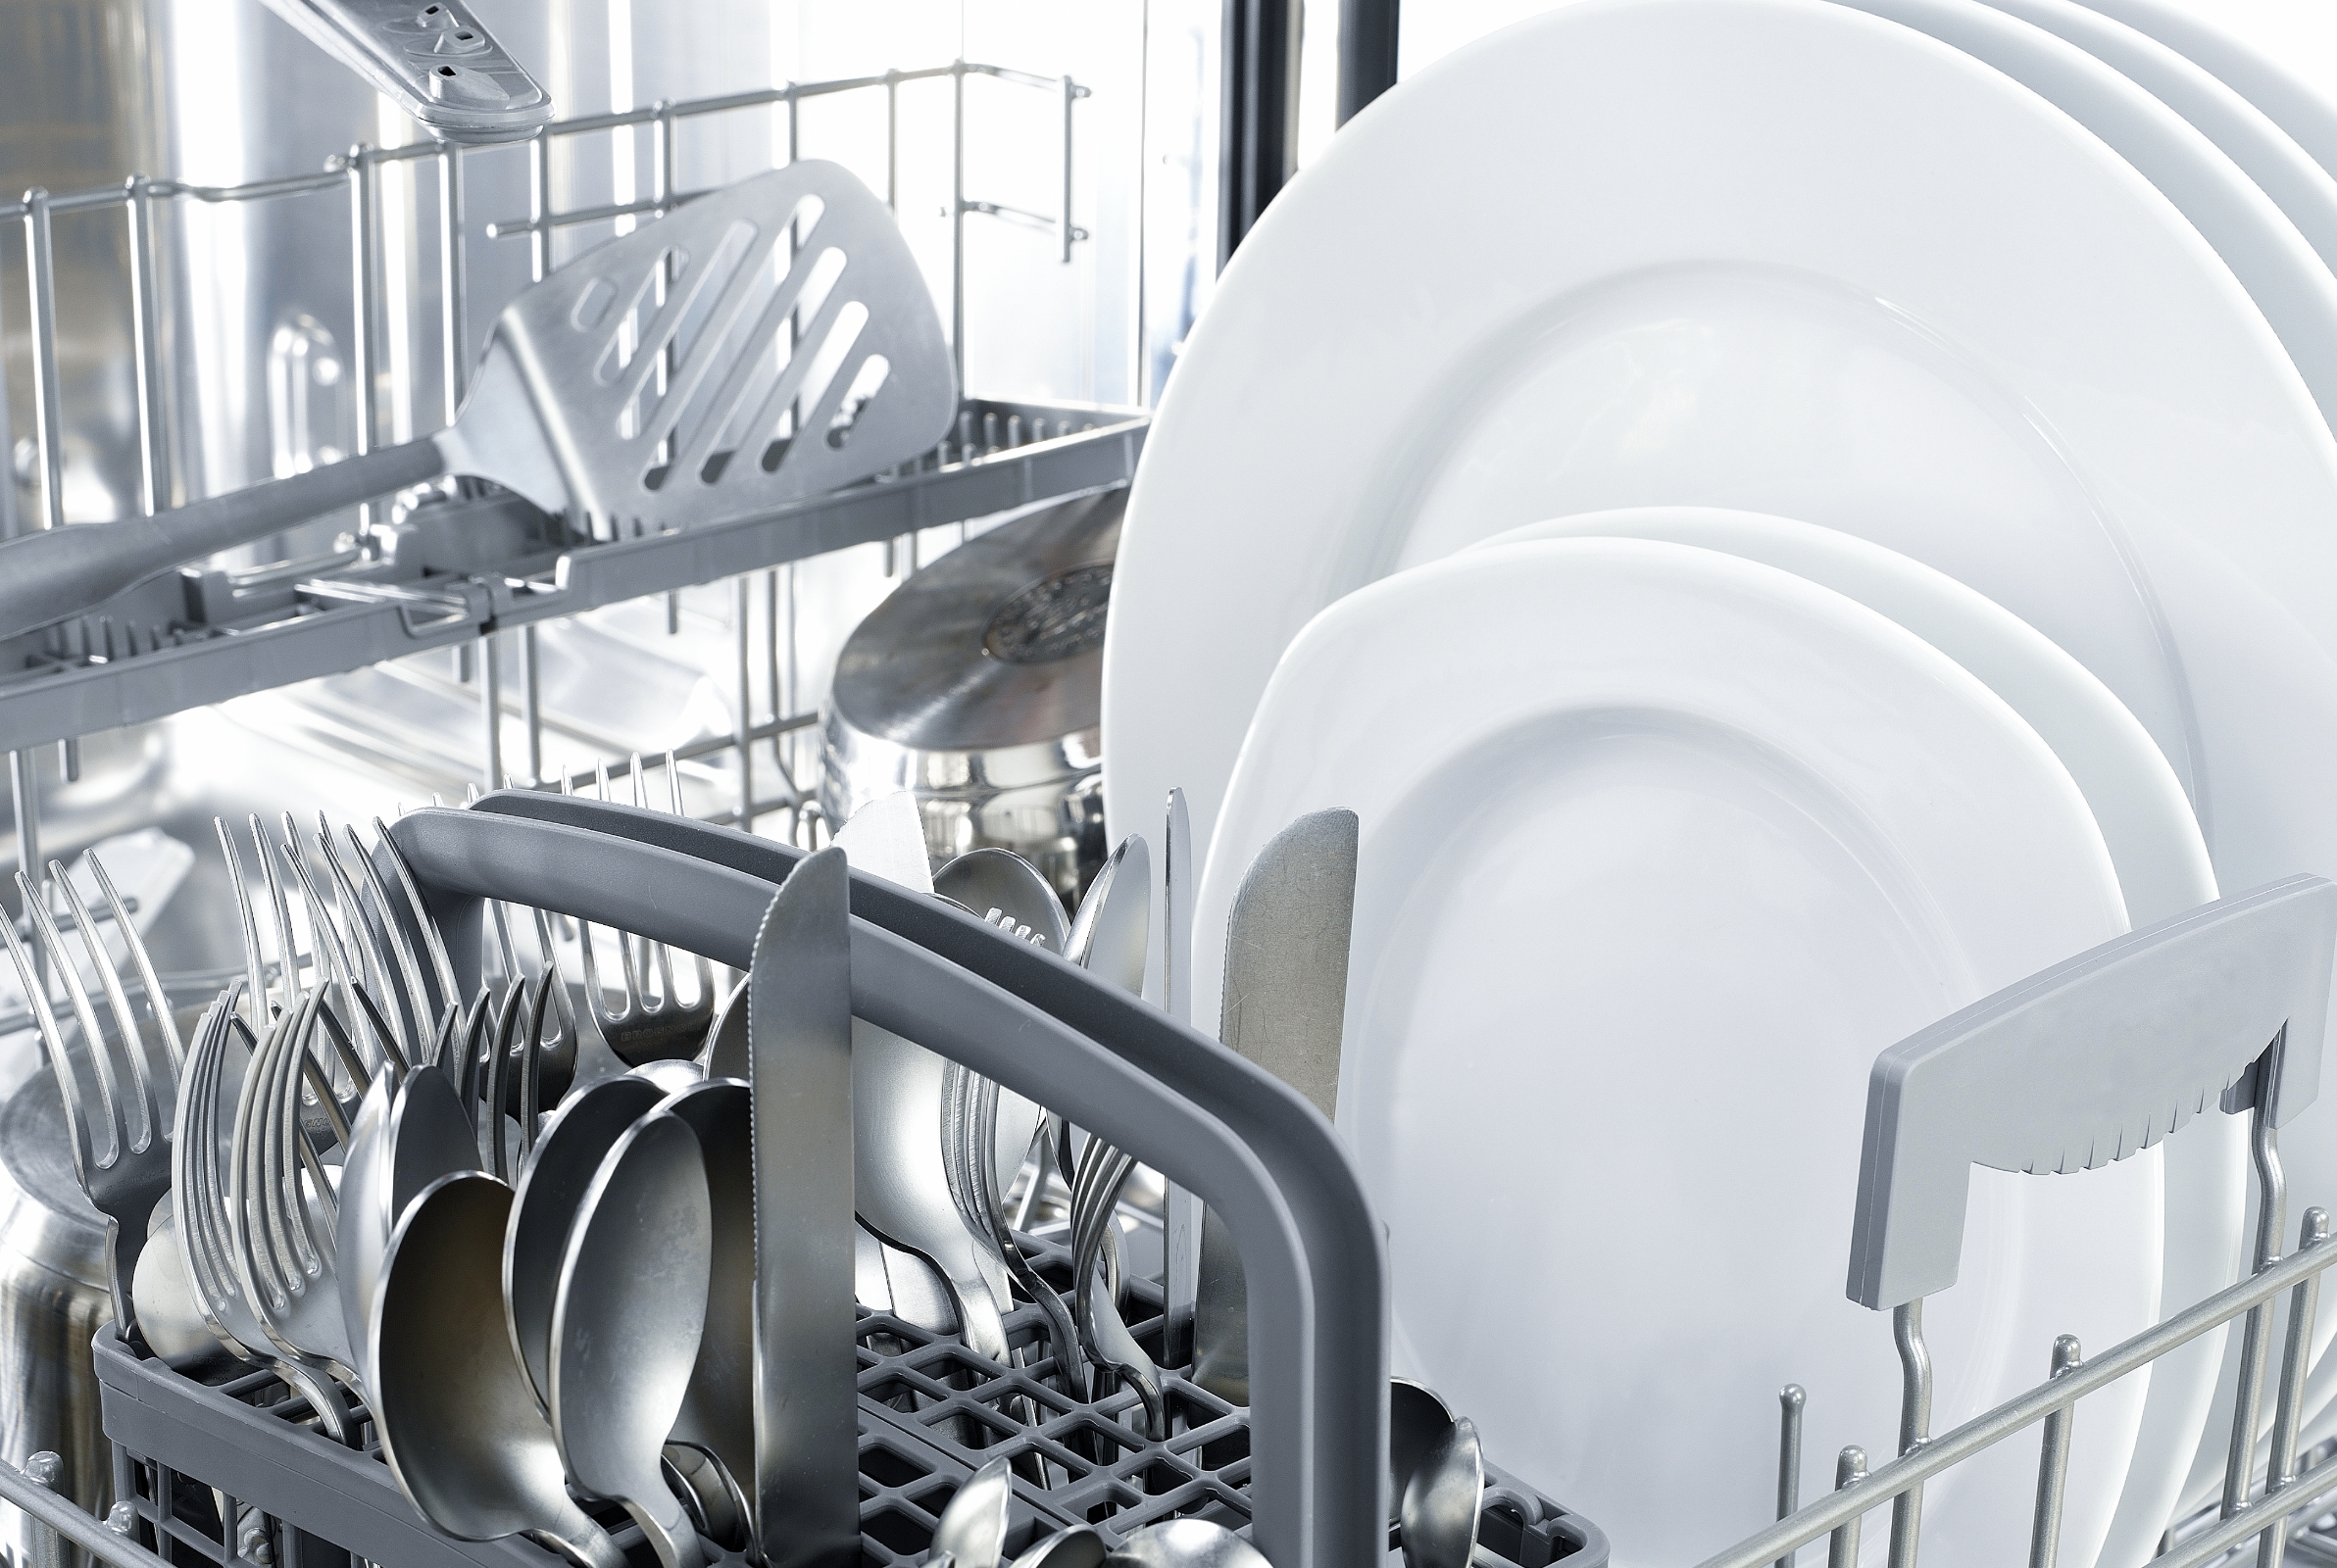 NEWS SPARE PARTS FOR ELECTROLUX DISHWASHERS